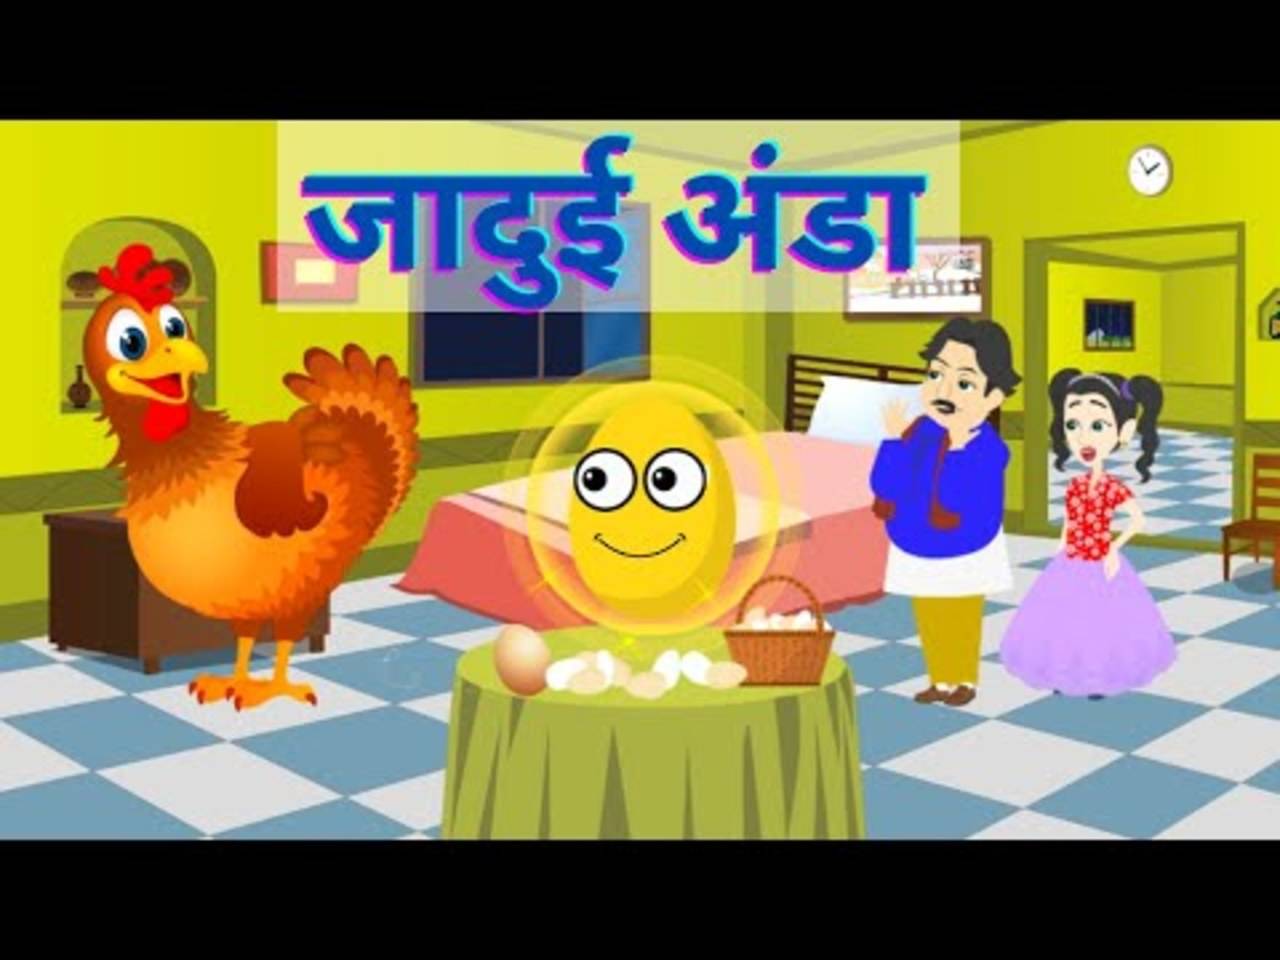 Watch Latest Children Hindi Story 'Jadui Anda' For Kids - Check Out Kids  Nursery Rhymes And Baby Songs In Hindi | Entertainment - Times of India  Videos